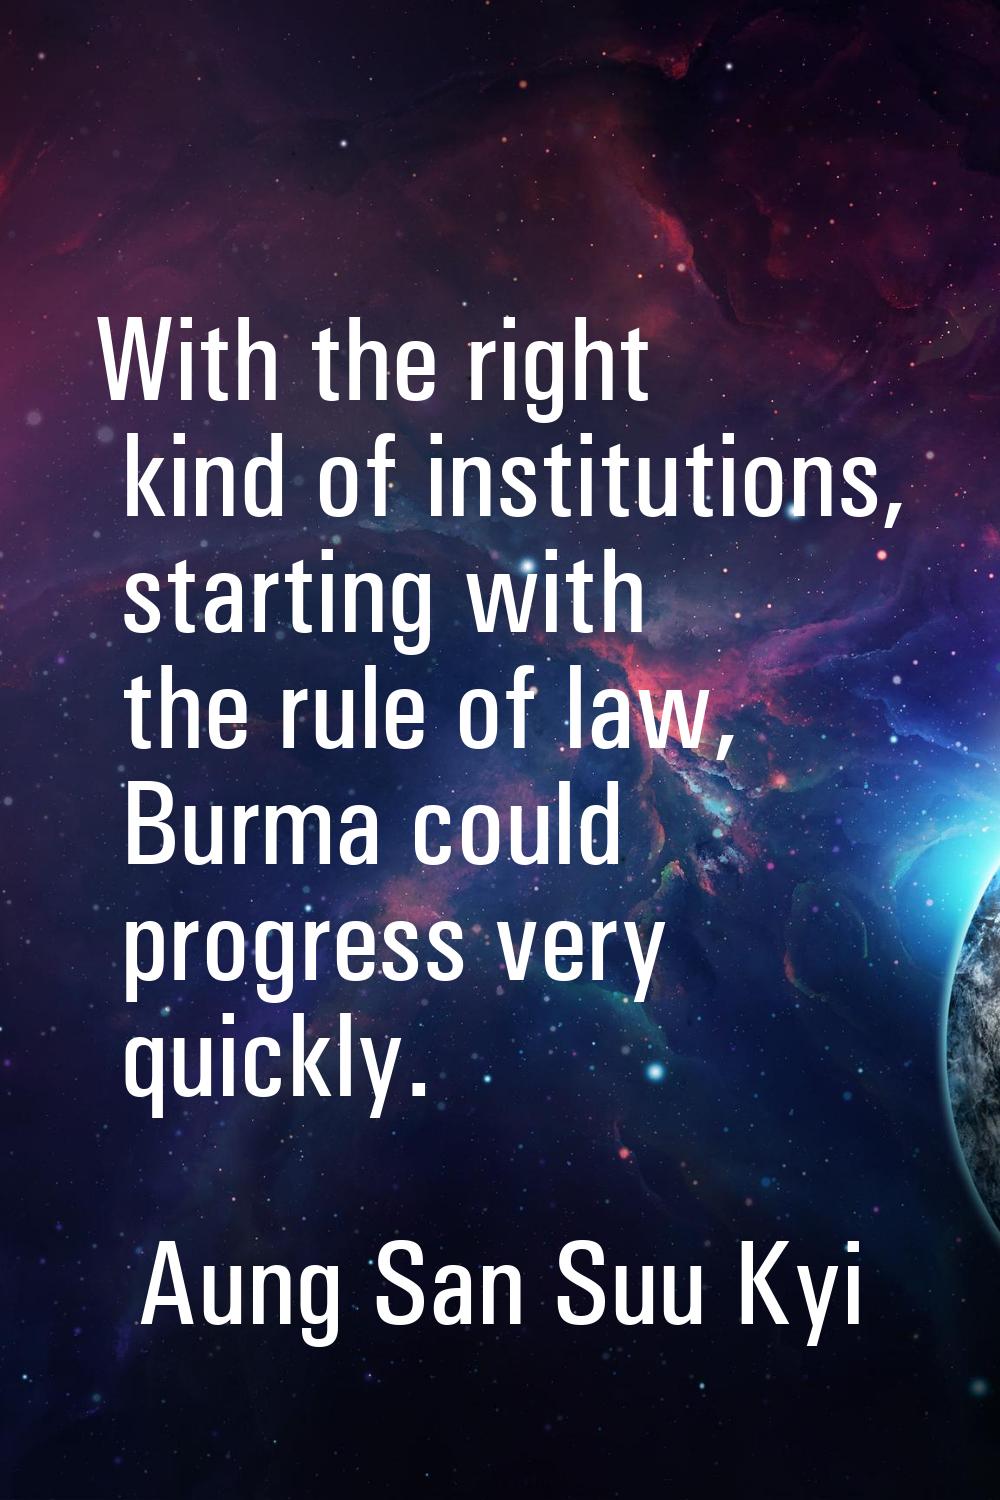 With the right kind of institutions, starting with the rule of law, Burma could progress very quick